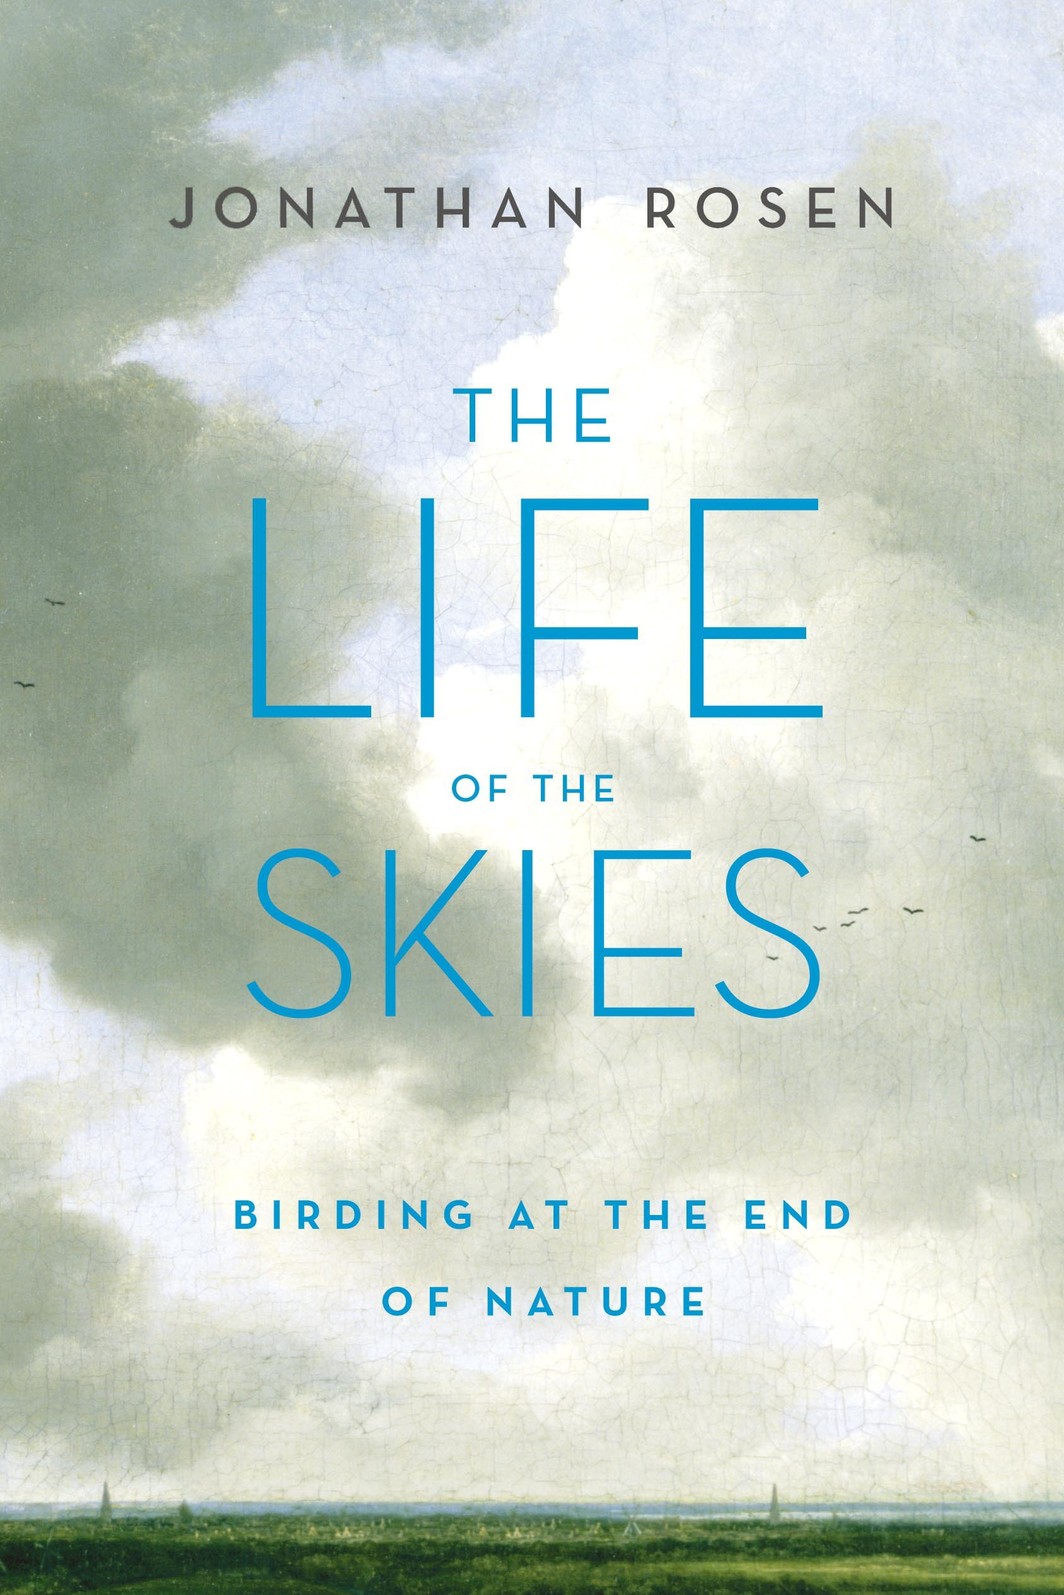 The cover of The Life of the Skies